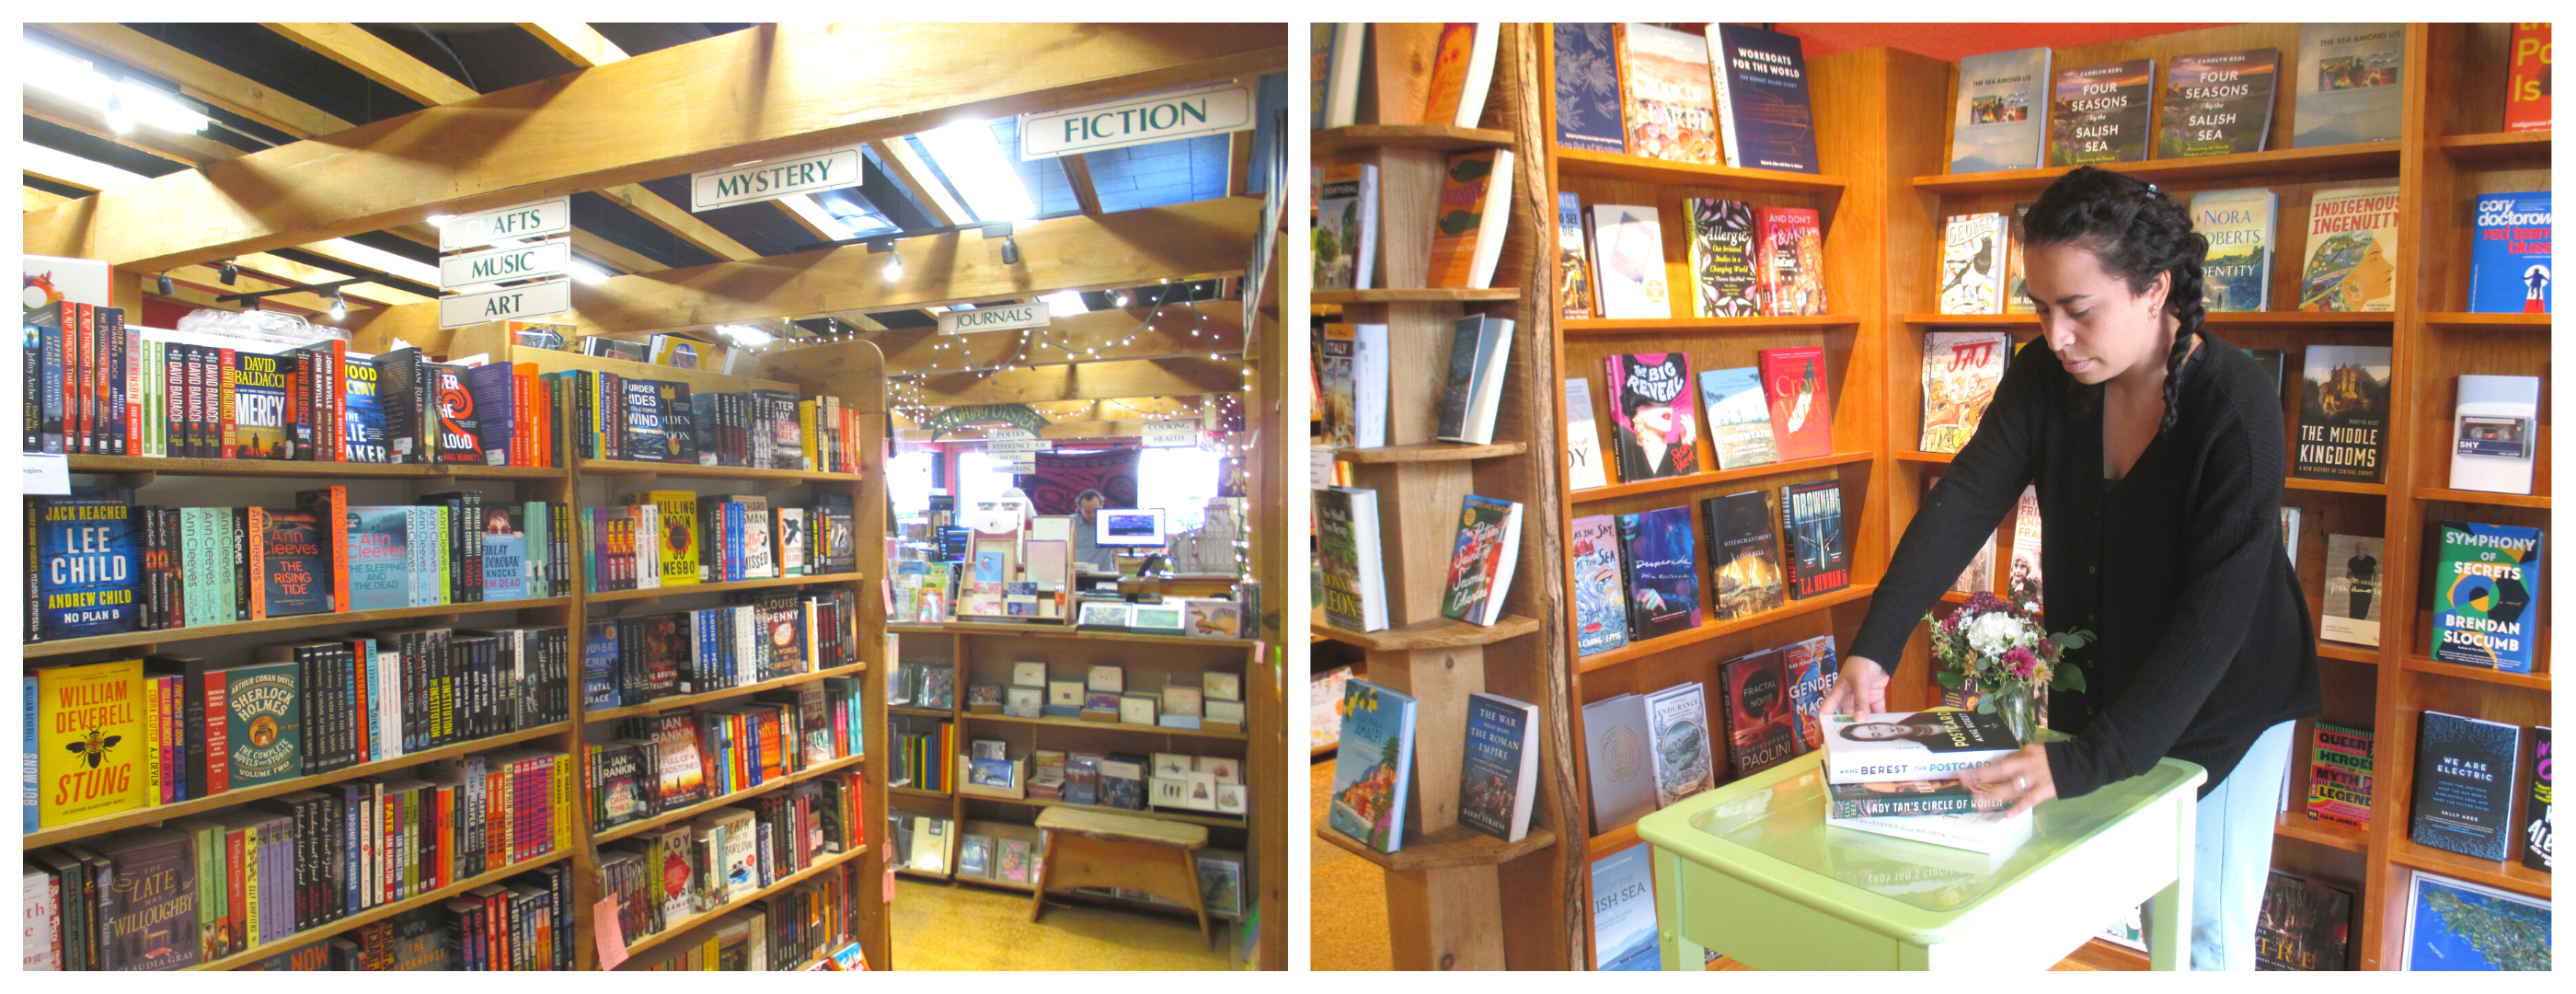 Photos of the interior of Laughing Oyster Bookshop including shelves and a bookseller preparing staging a photograph.